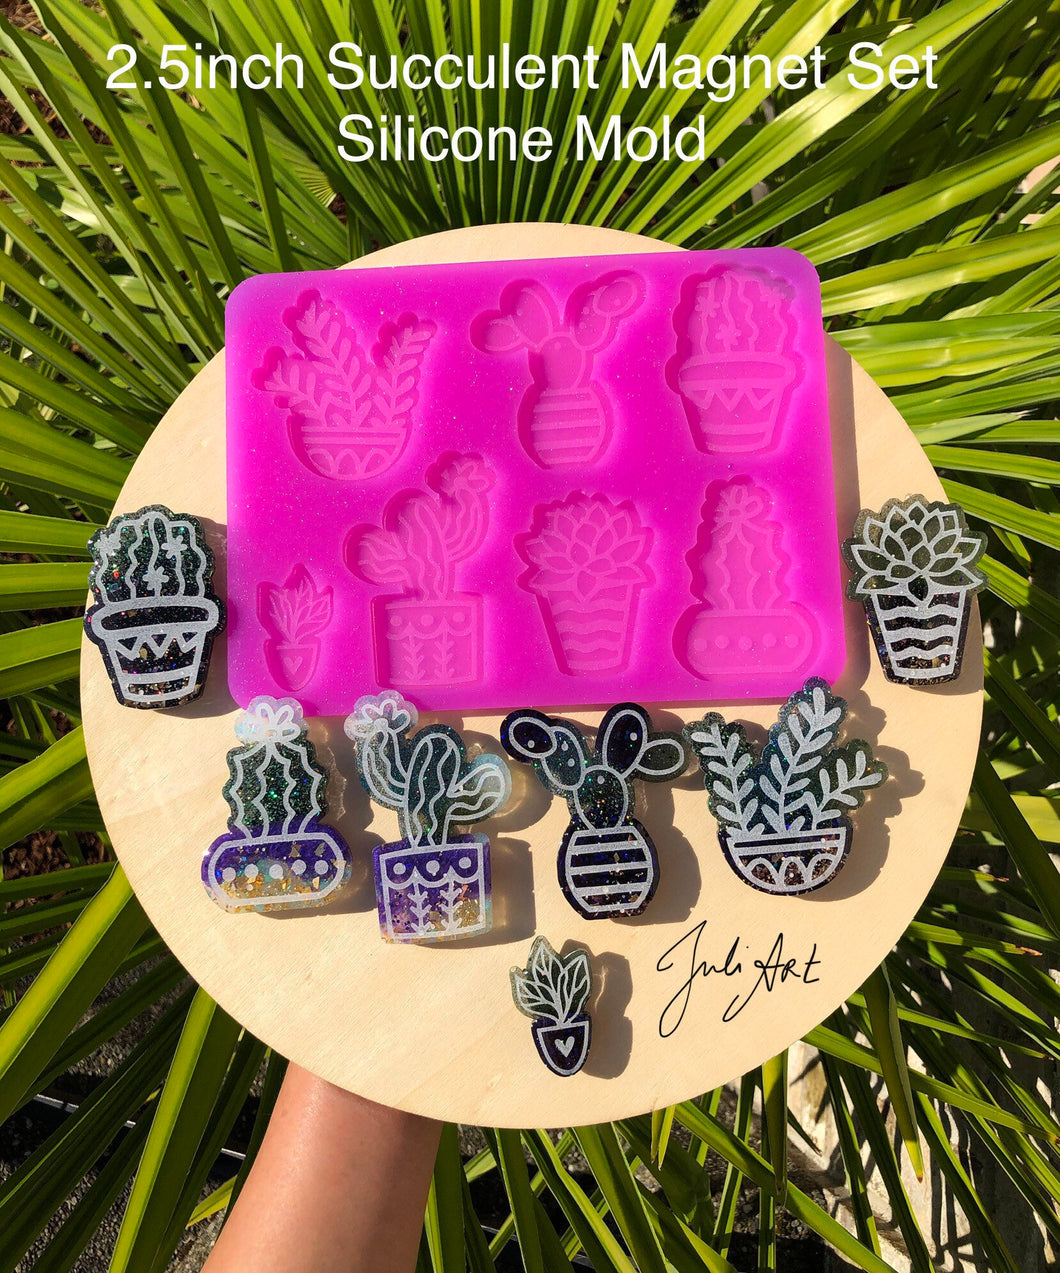 2.75 inch Succulent Magnet Set Silicone Mold for Resin casting